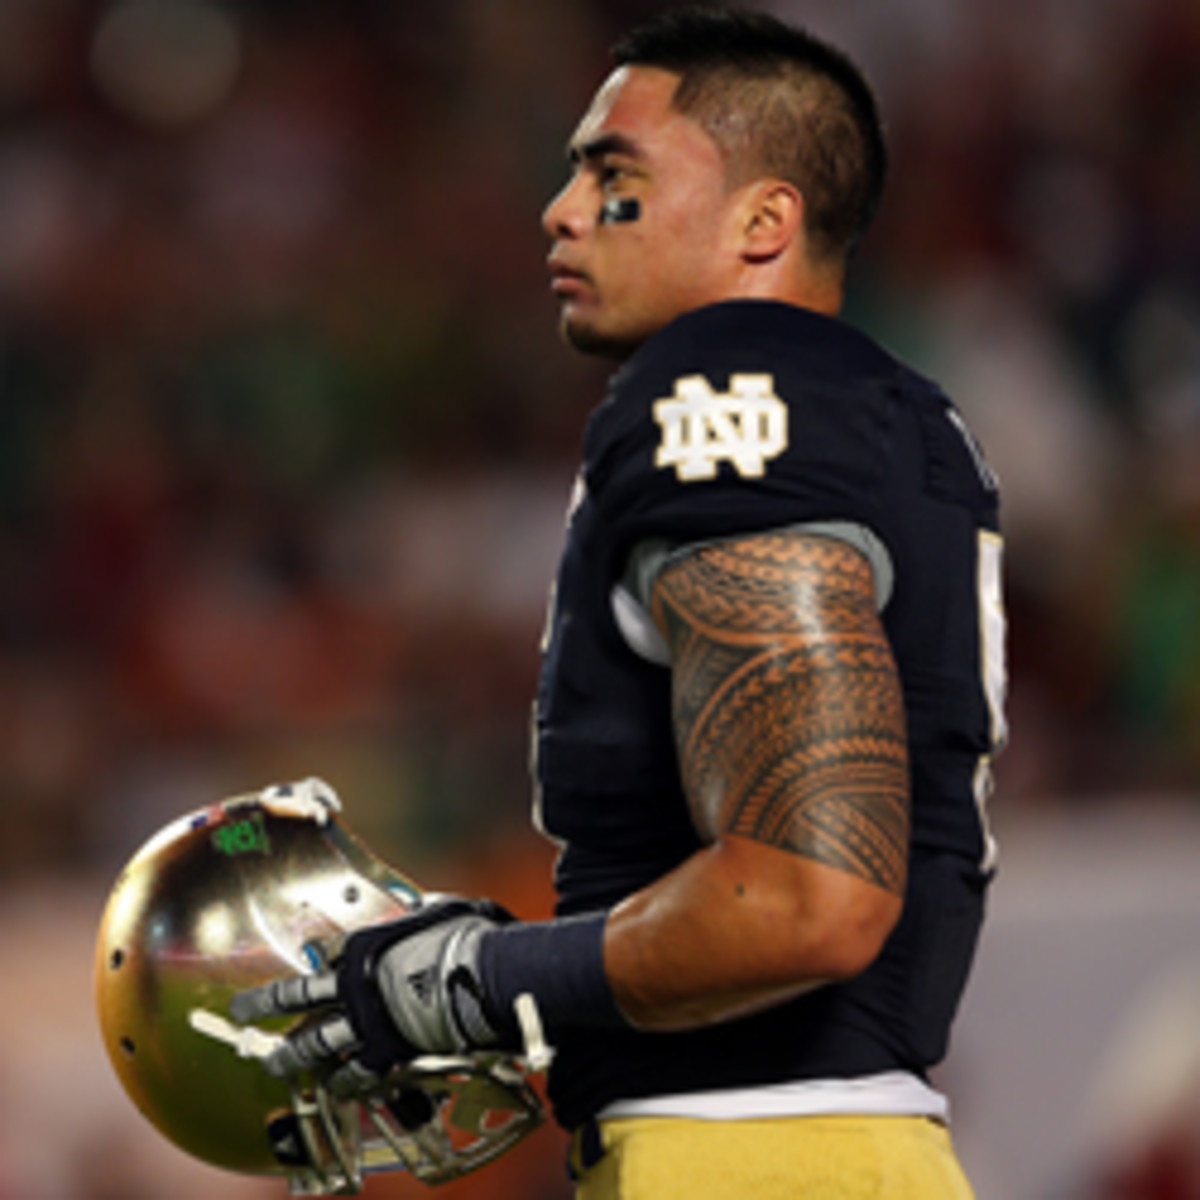 A investigation by Notre Dame said Manti Te'o was the victim of a hoax. (Mike Ehrmann/Getty Images)